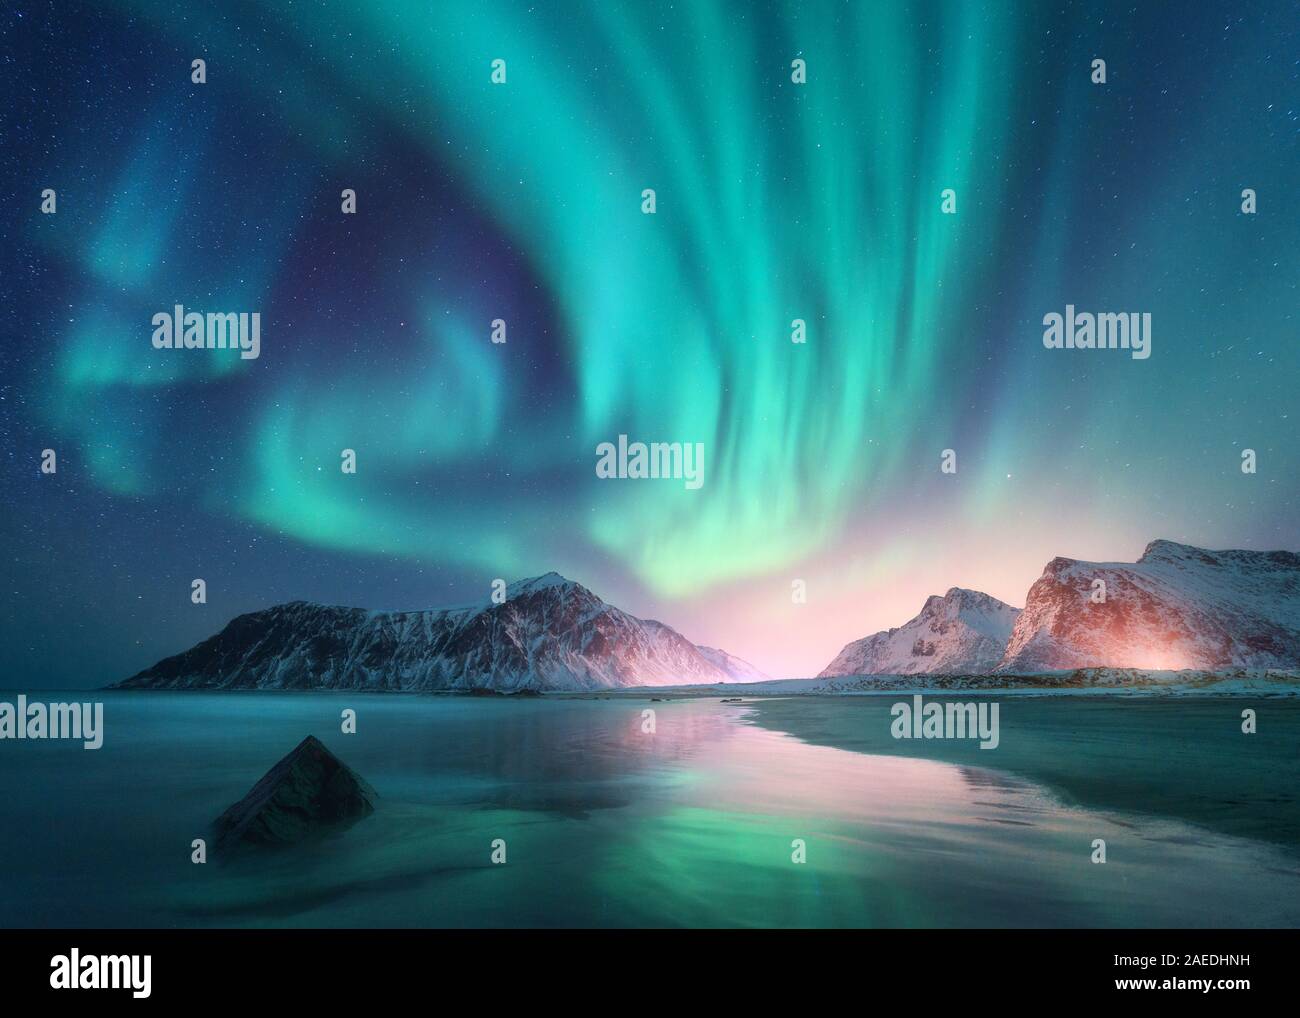 Aurora borealis over the sea and snowy mountains. Northern lights Stock Photo